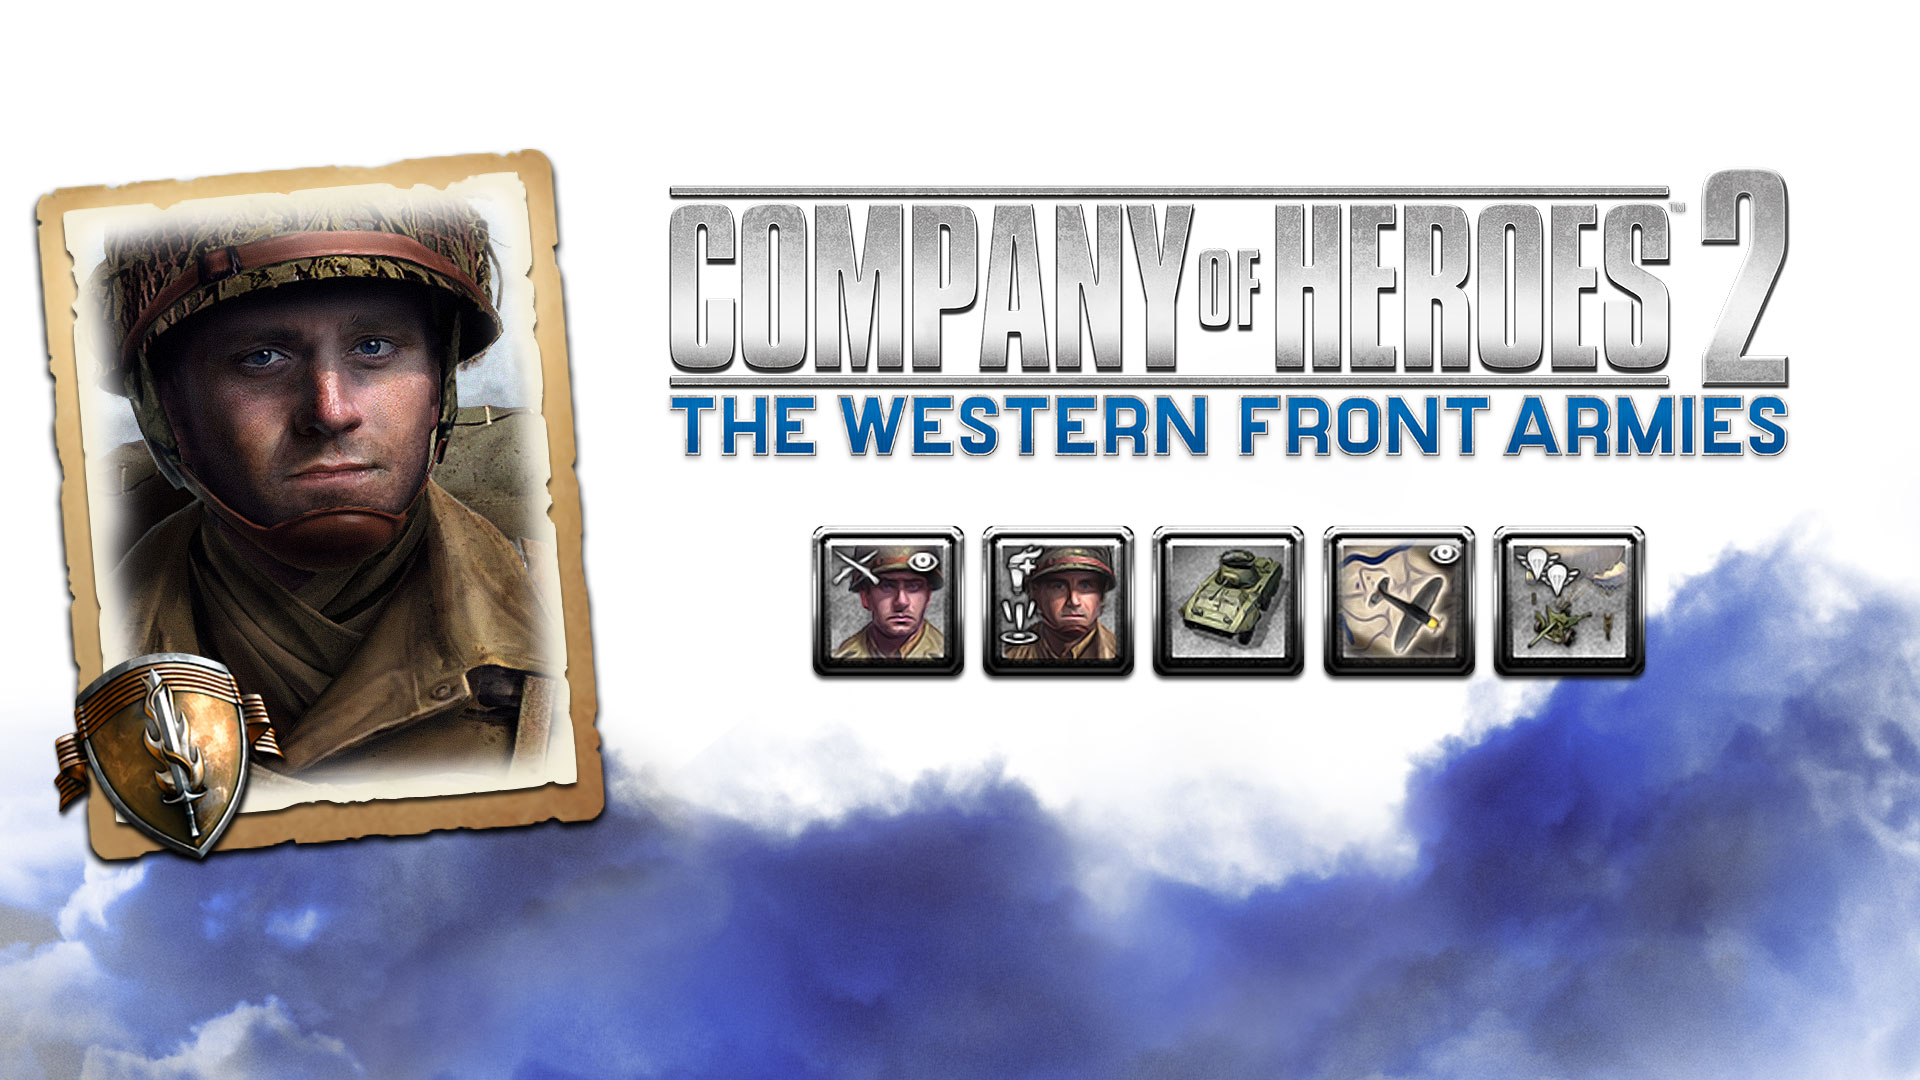 Company of Heroes 2 - US Forces Commander: Recon Support Company DLC Steam CD Key 10.16$